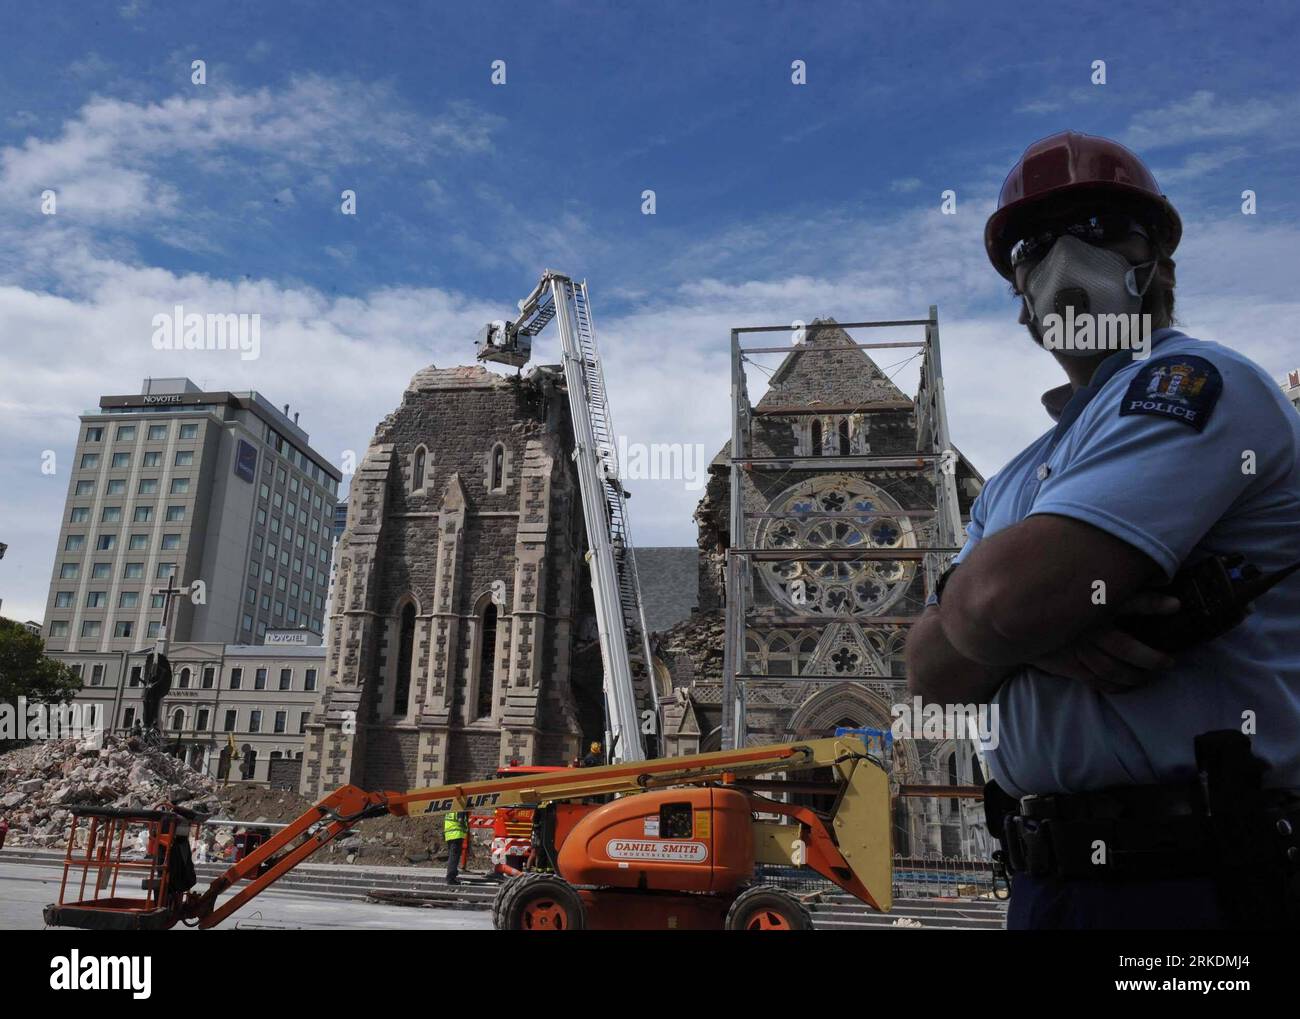 110302 -- CHRISTCHURCH, March 2, 2011 Xinhua -- A policeman with face mask stand near a damaged church in Christchurch, New Zealand, March 2, 2011. The death toll from the Feb. 22 devastating 6.3 Christchurch earthquake has risen to 160, New Zealand police said on Wednesday. Xinhua/Li Qiuchan jl NEW ZEALAND-QUAKE-DEATH TOLL-RISE PUBLICATIONxNOTxINxCHN Stock Photo